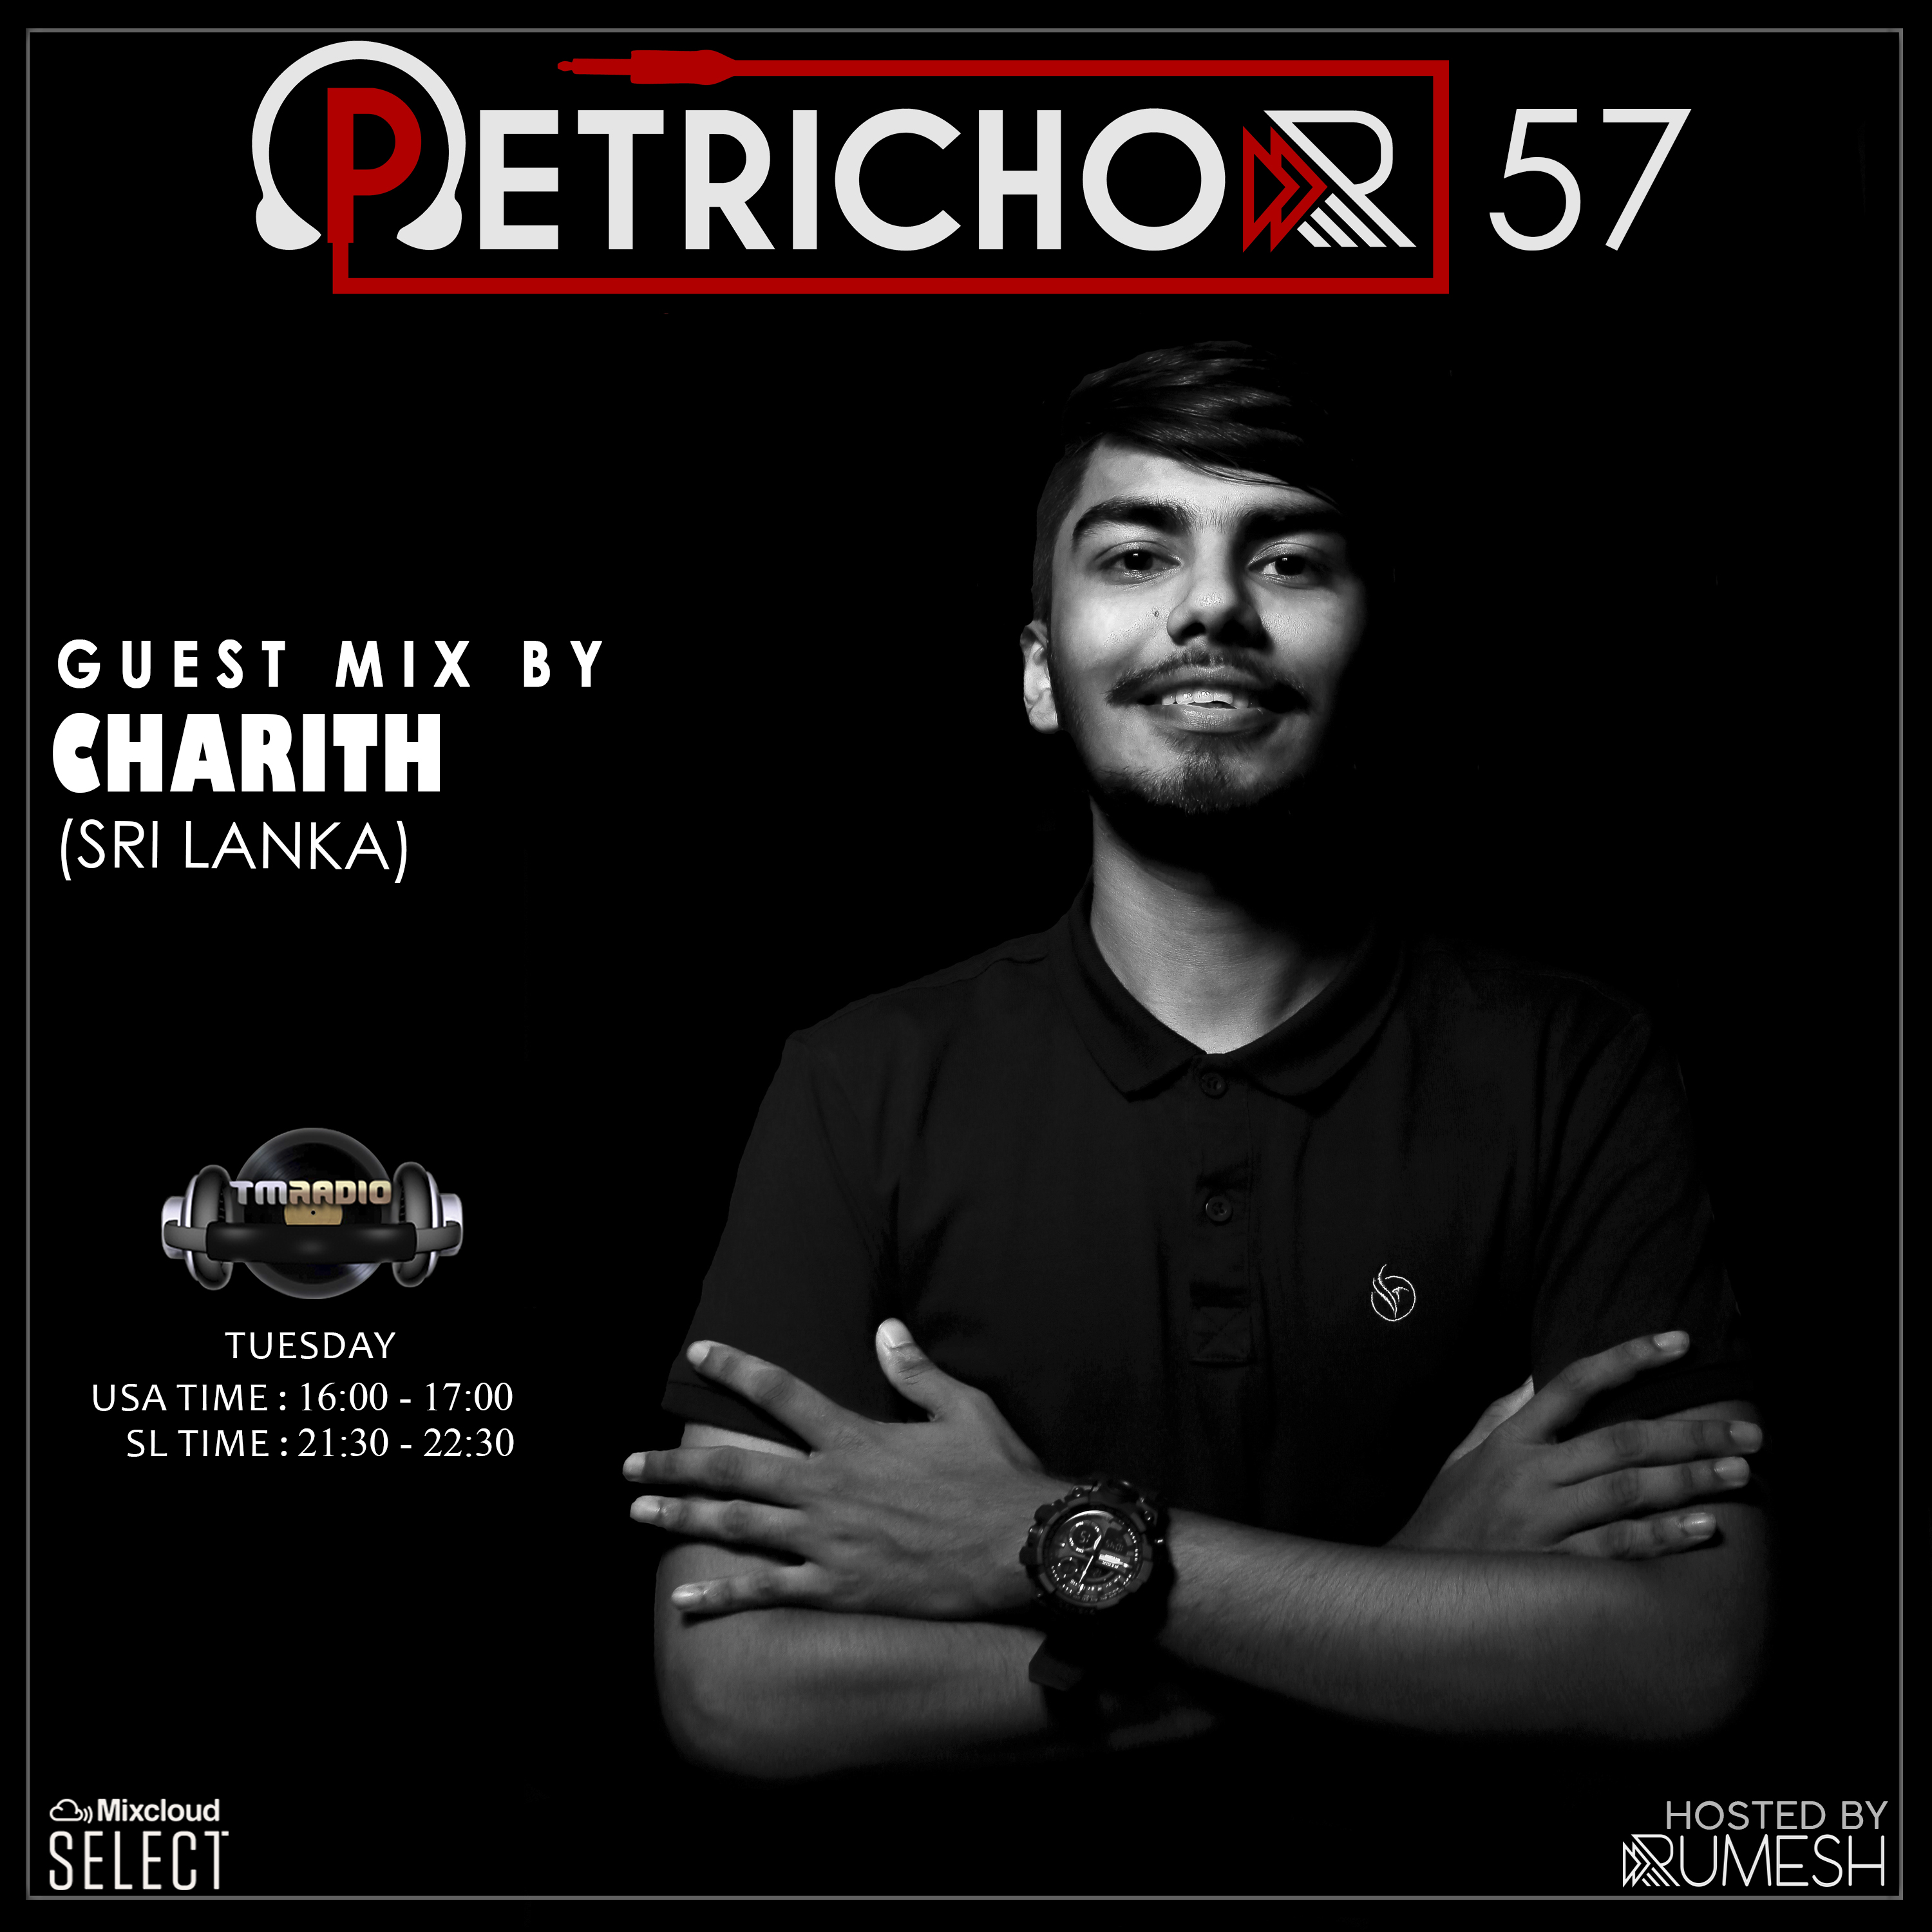 Petrichor 57 guest mix by Charith (Sri Lanka) (from December 10th, 2019)